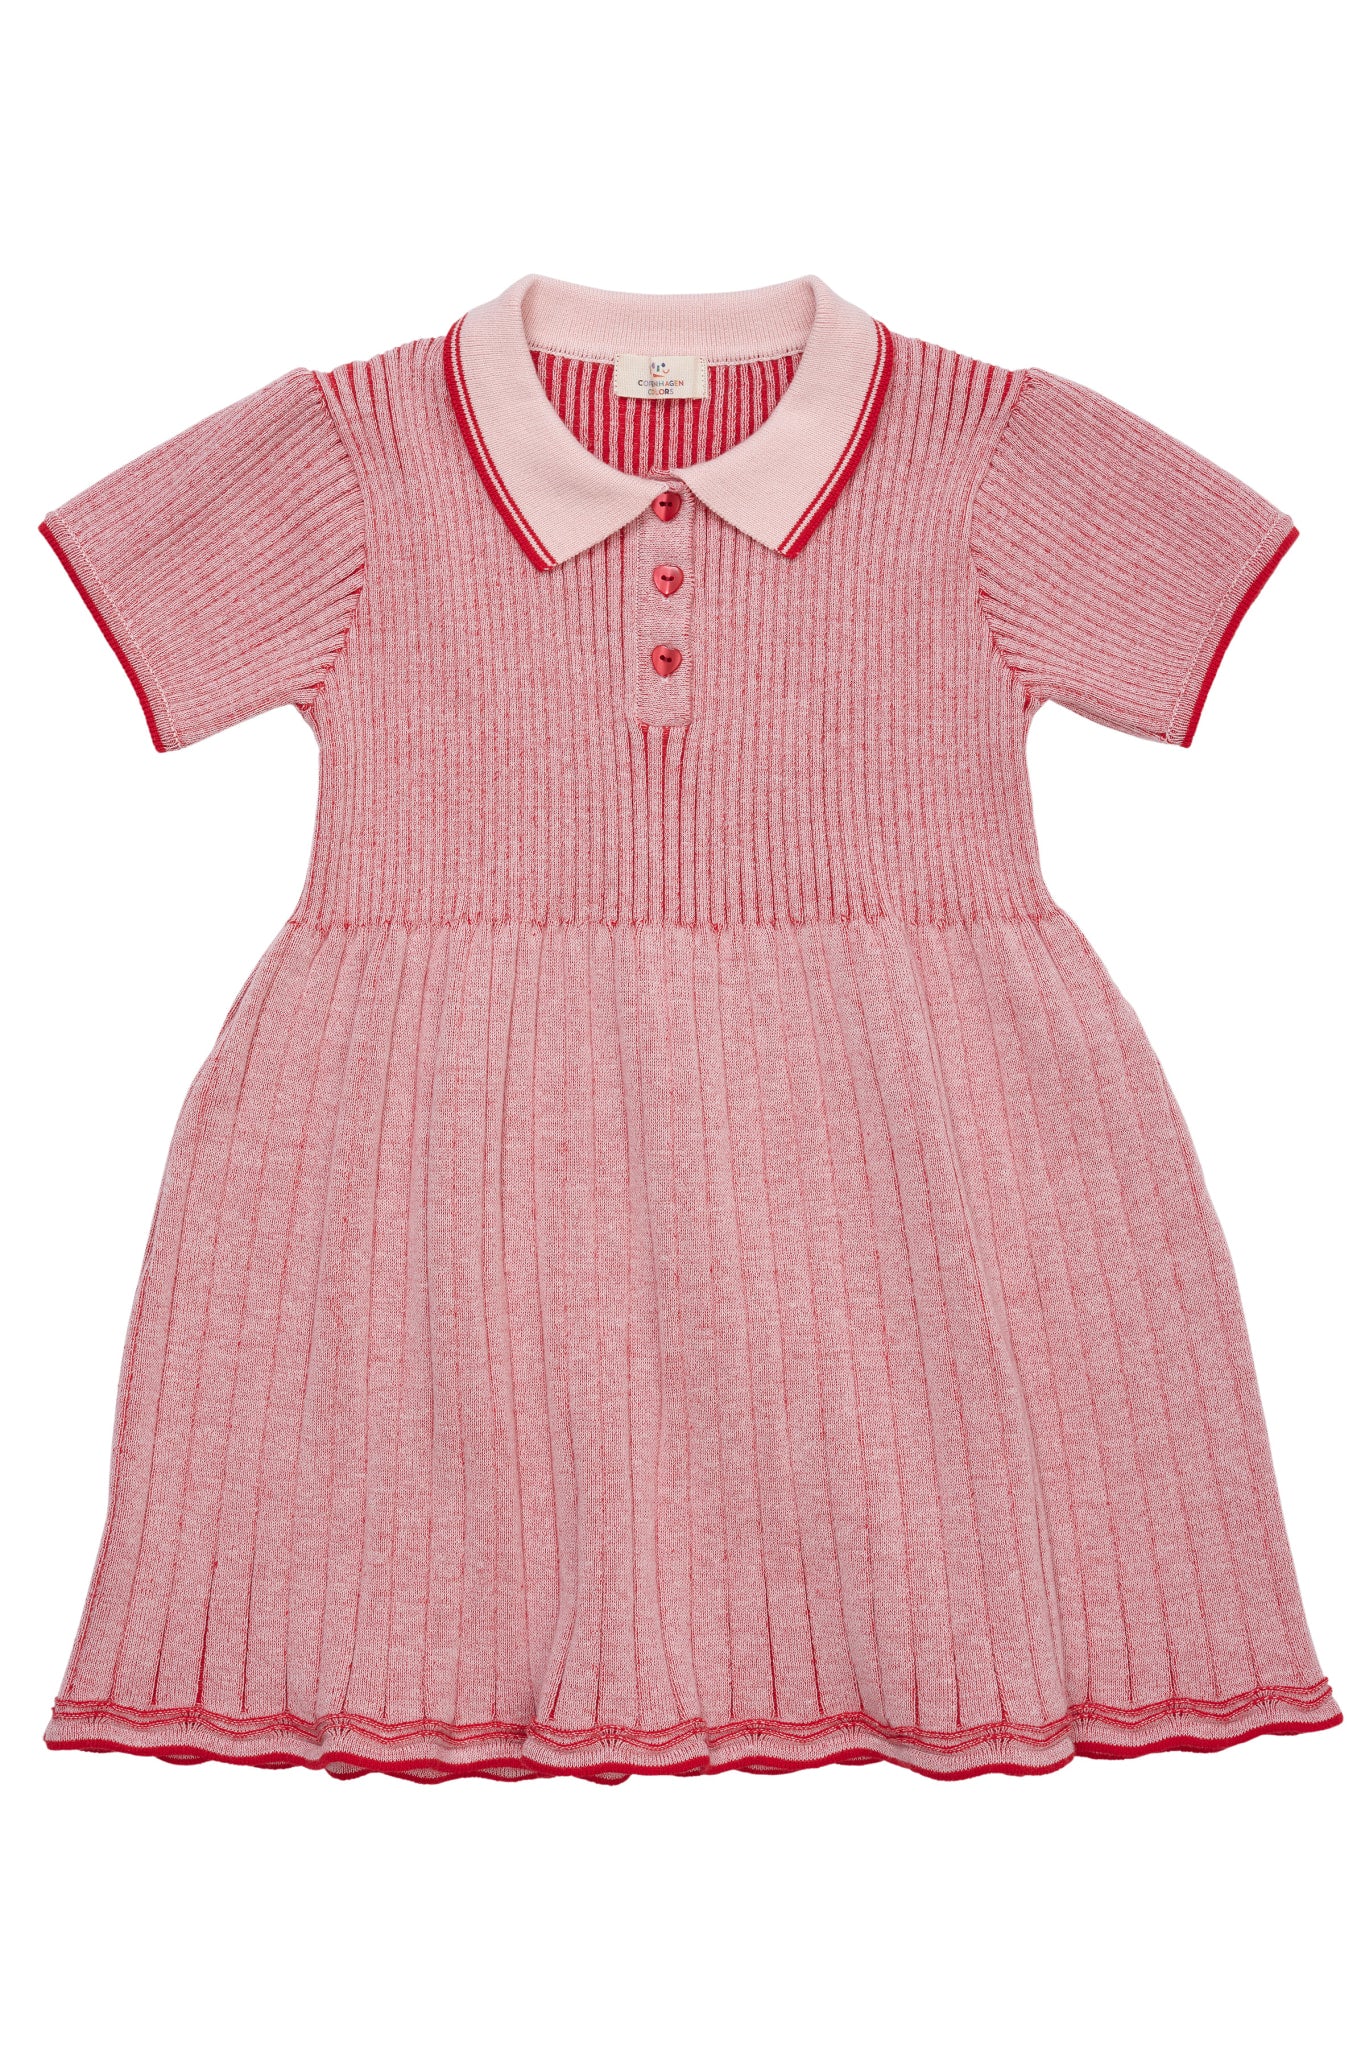 RIB POLO KNITTED DRESS - DUSTY ROSE/RED COMB.